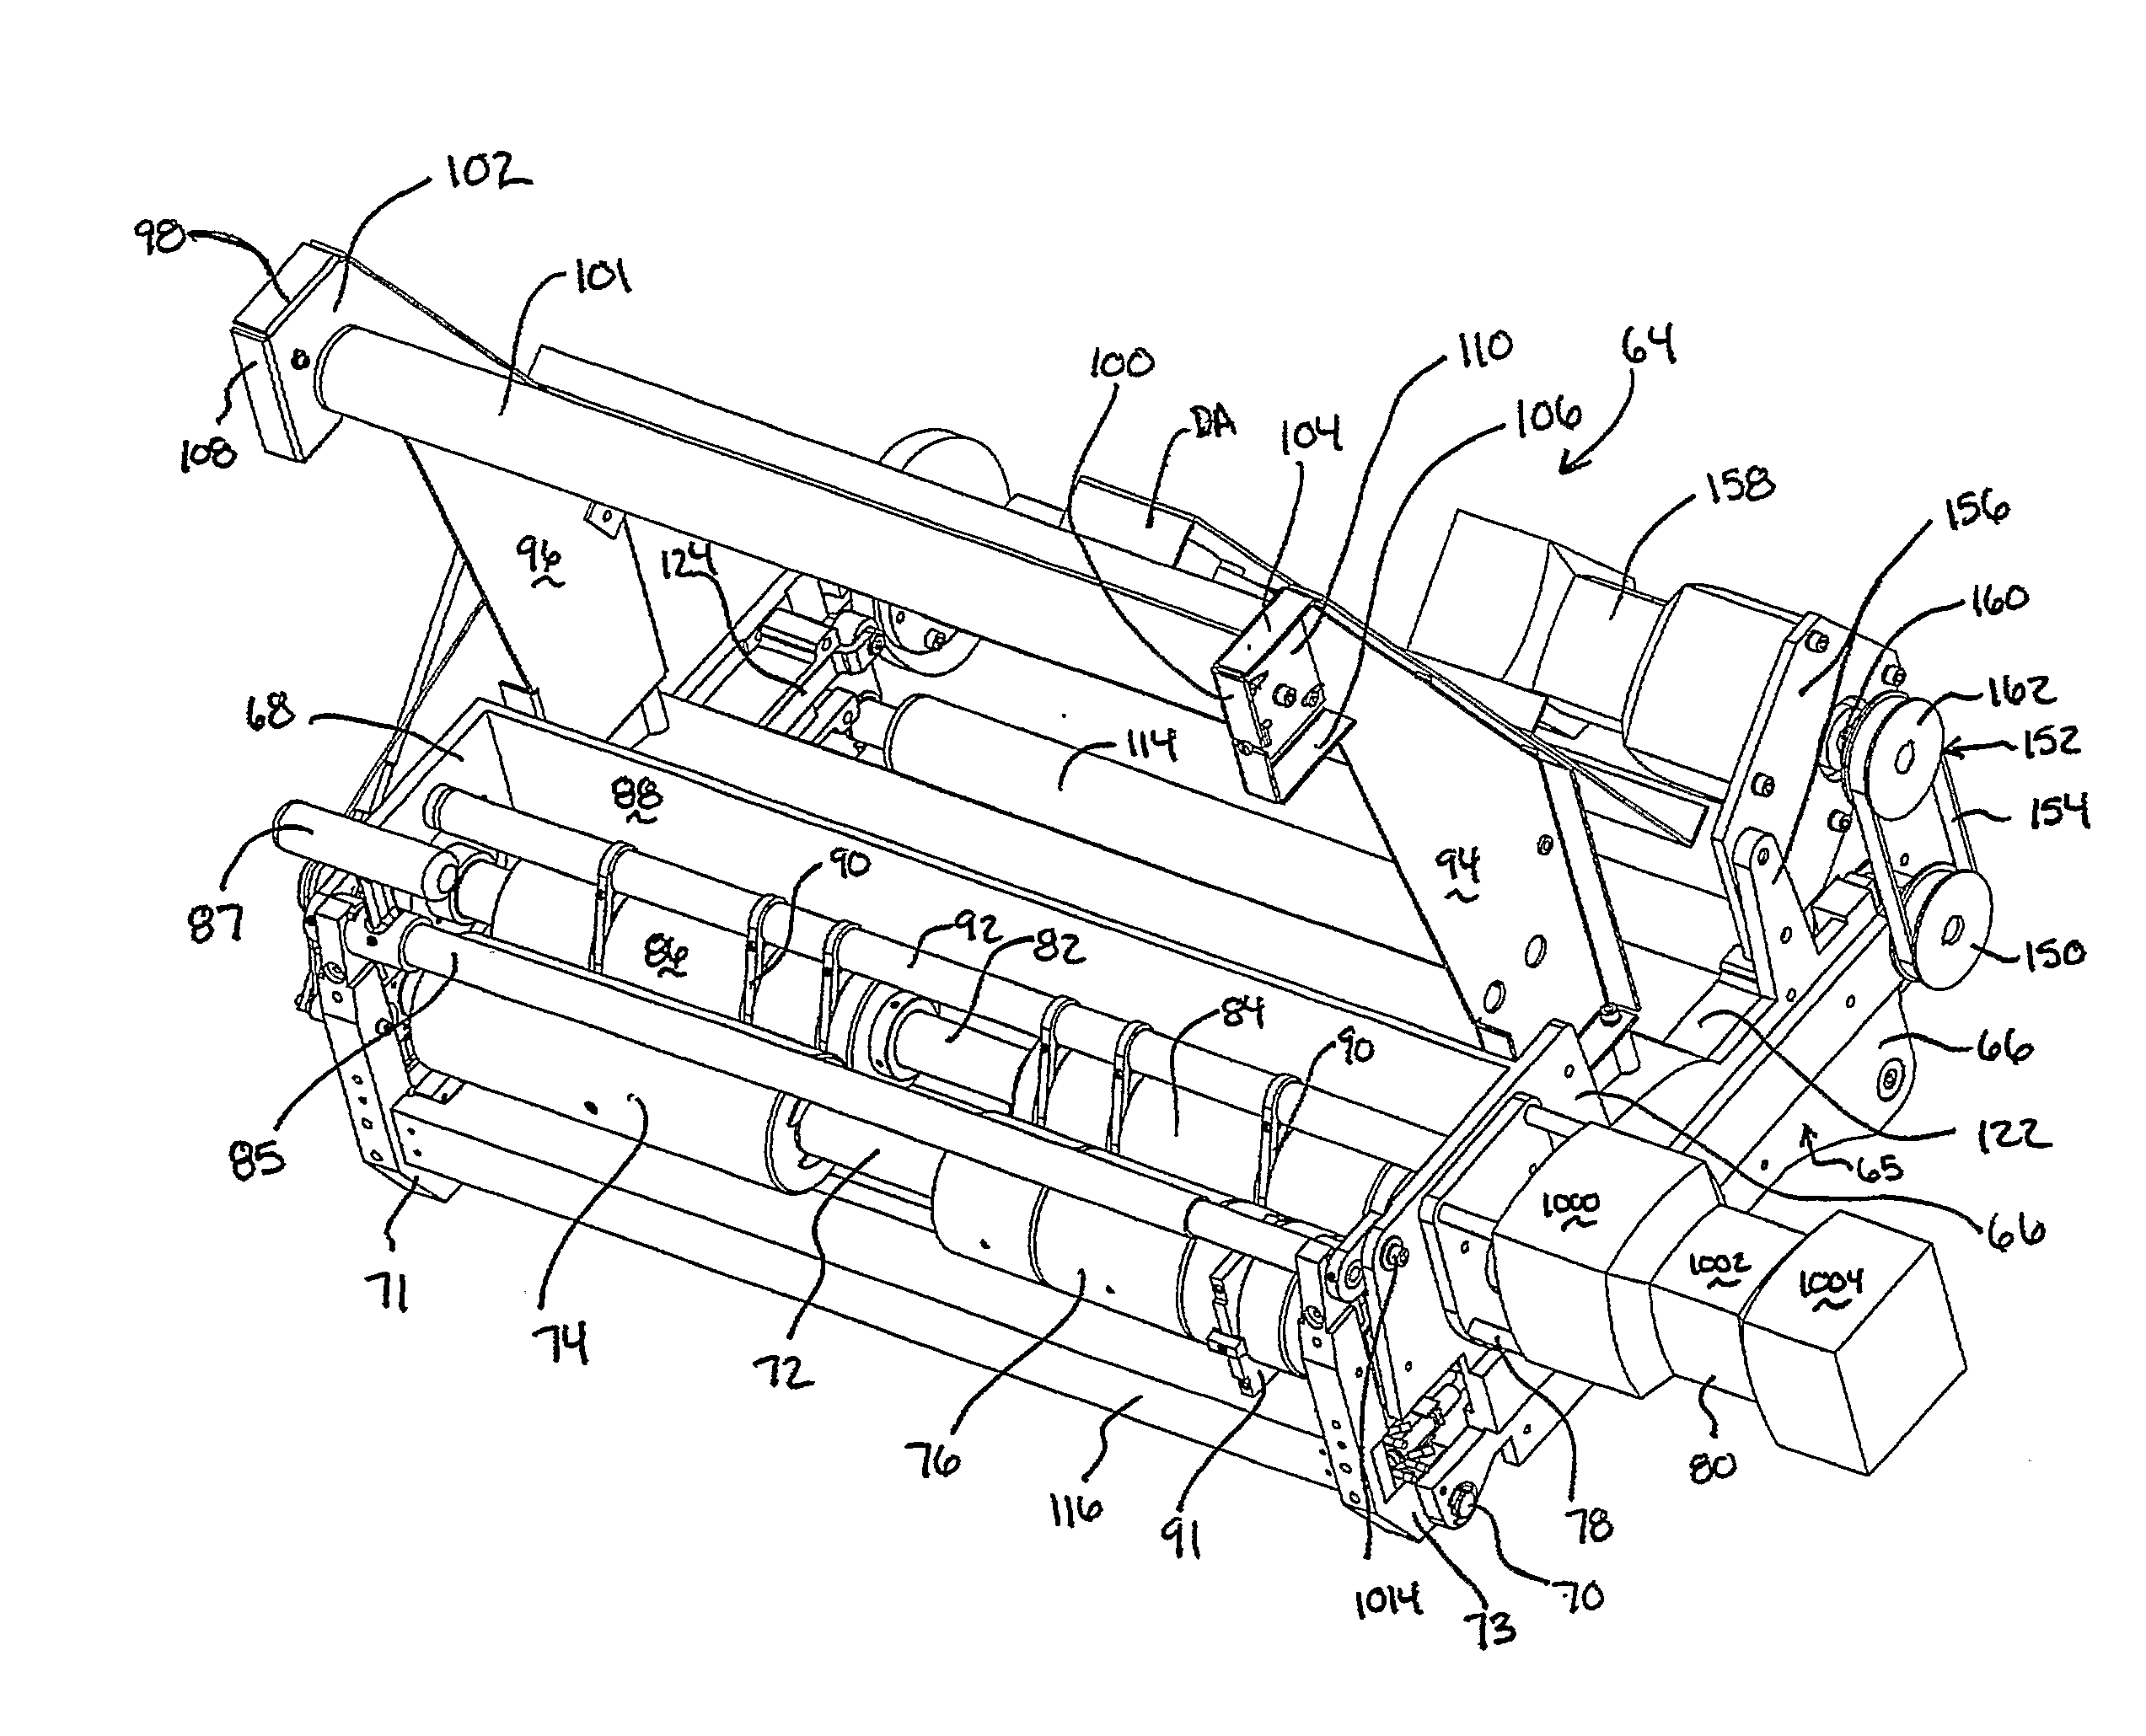 Dispensing system with material spill prevention system